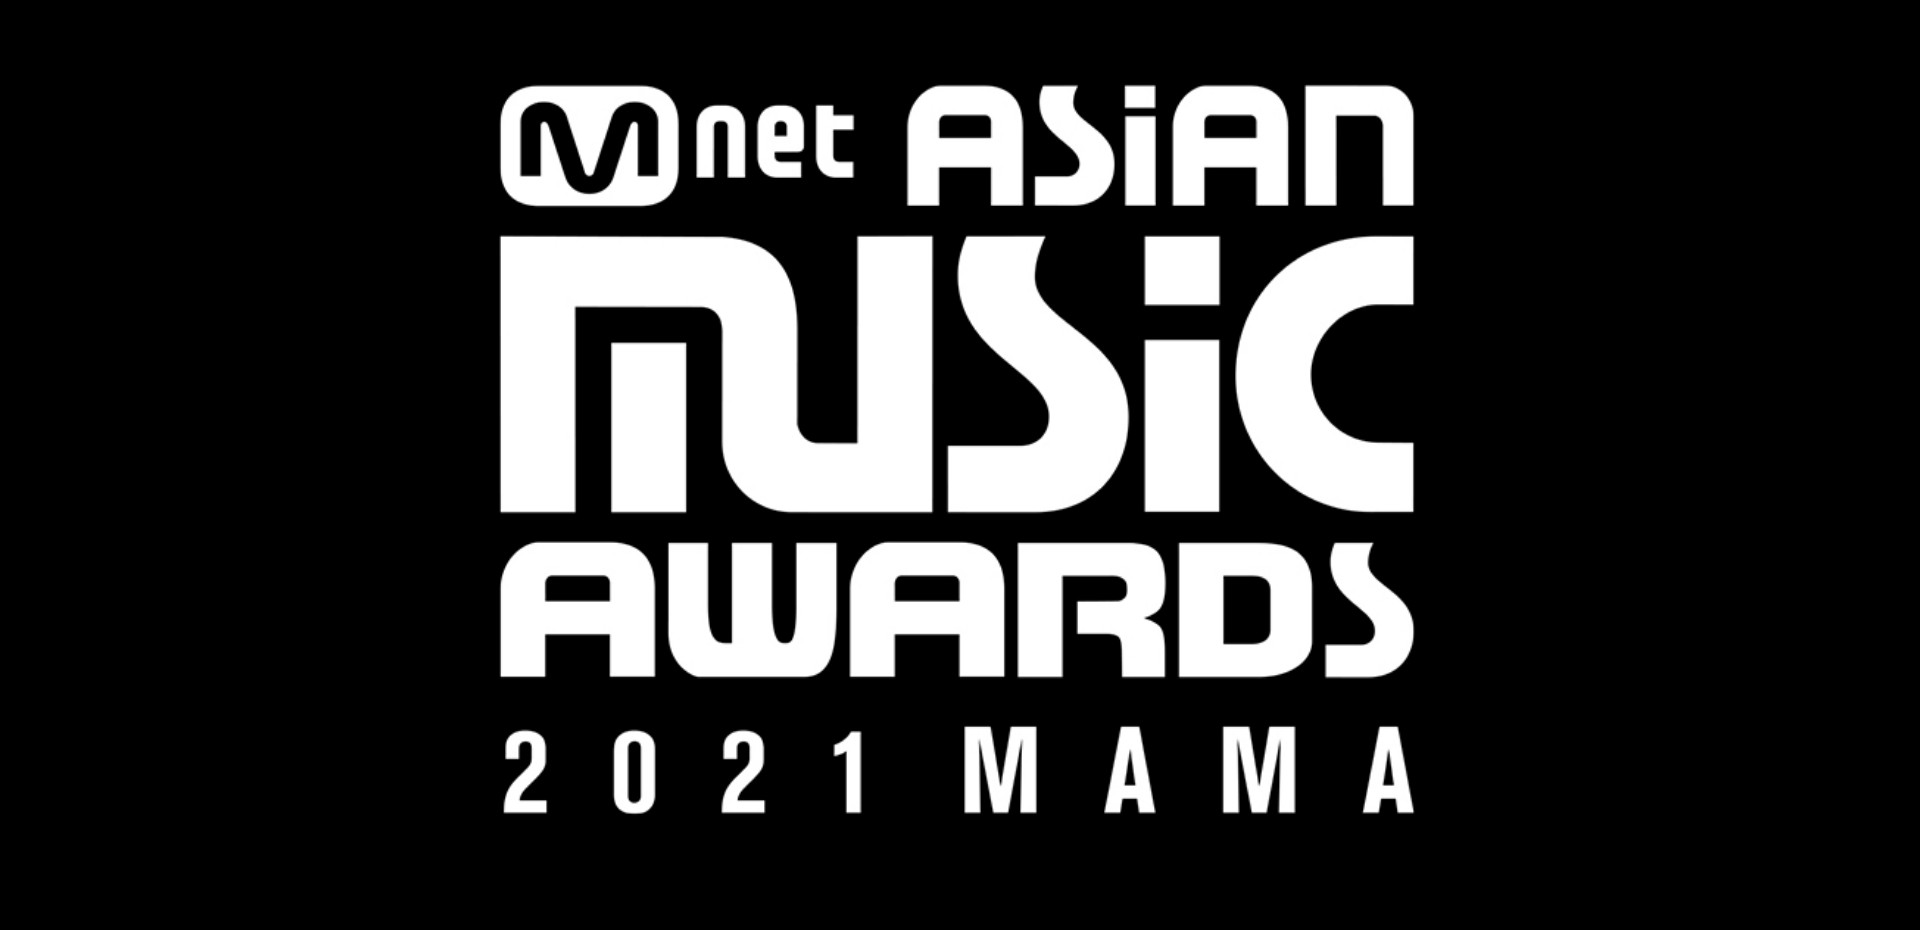 Mnet Asian Music Awards announces return, to launch special video to celebrate 12th anniversary